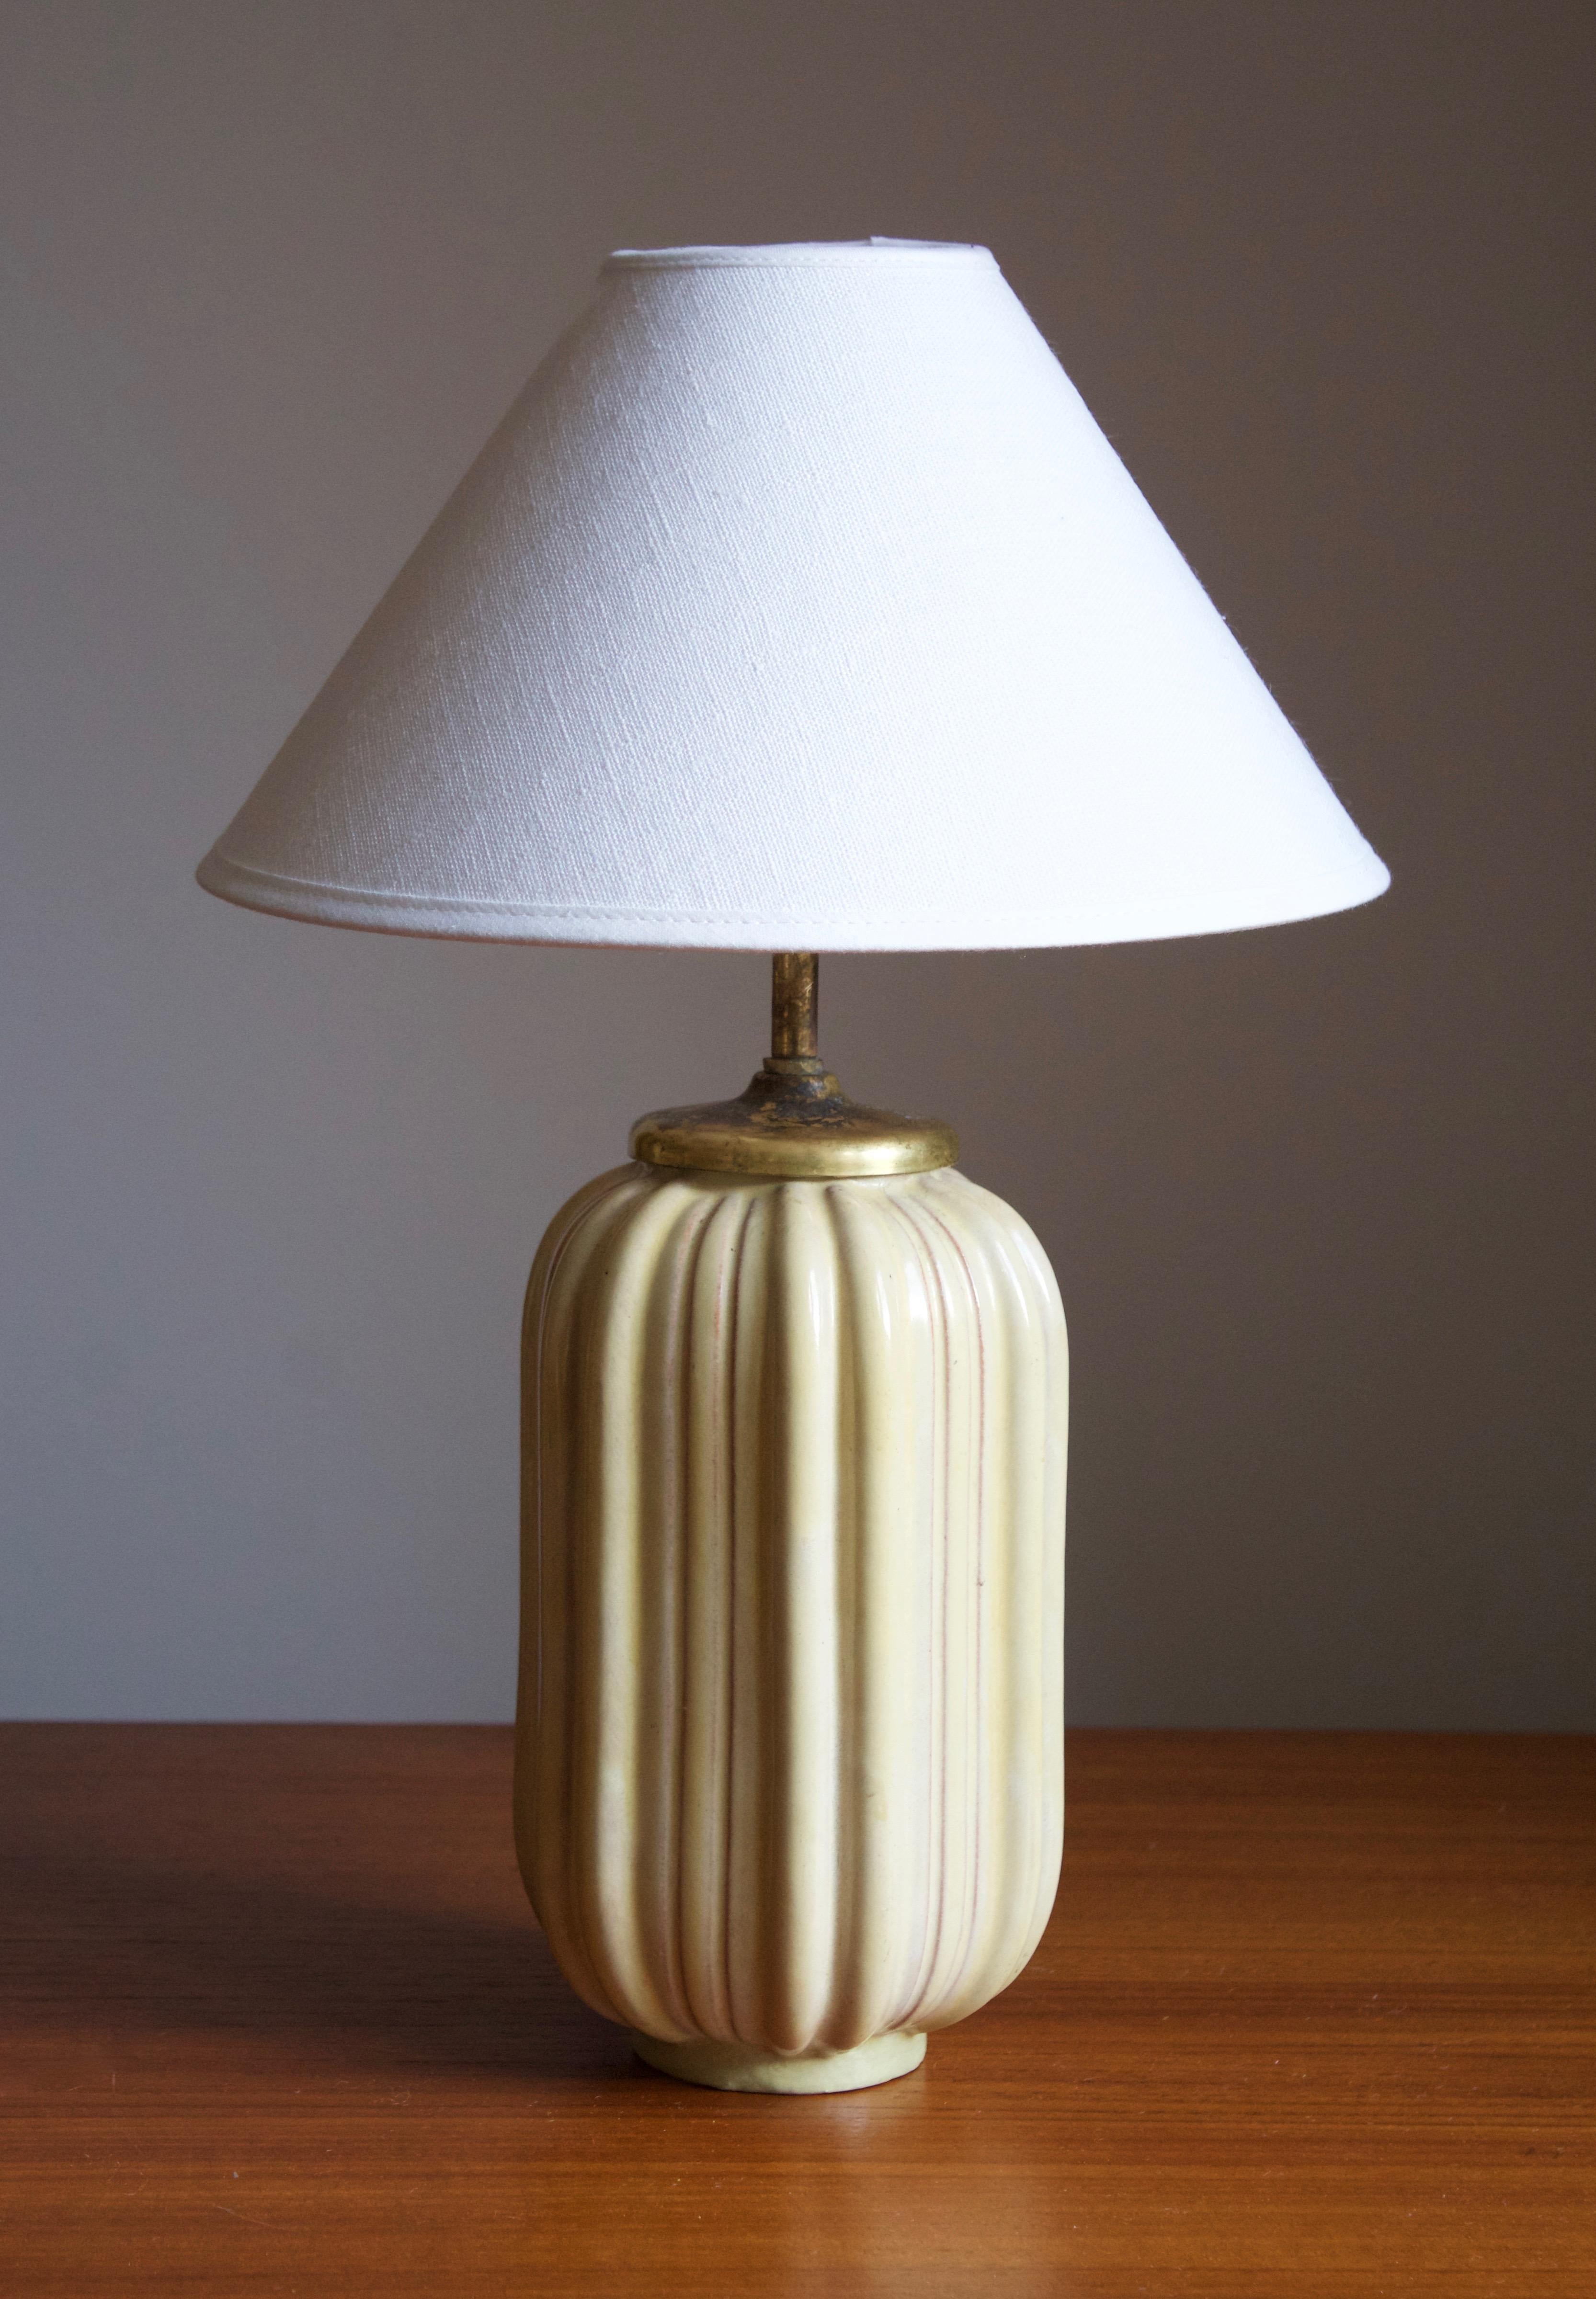 An early modernist table lamp. Produced by Upsala-Ekeby, Sweden, 1930s.

Stated dimensions exclude lampshade. Height includes socket. Sold without lampshade.

Glaze features a yellow color.

Other designers of the period include Ettore Sottsass,